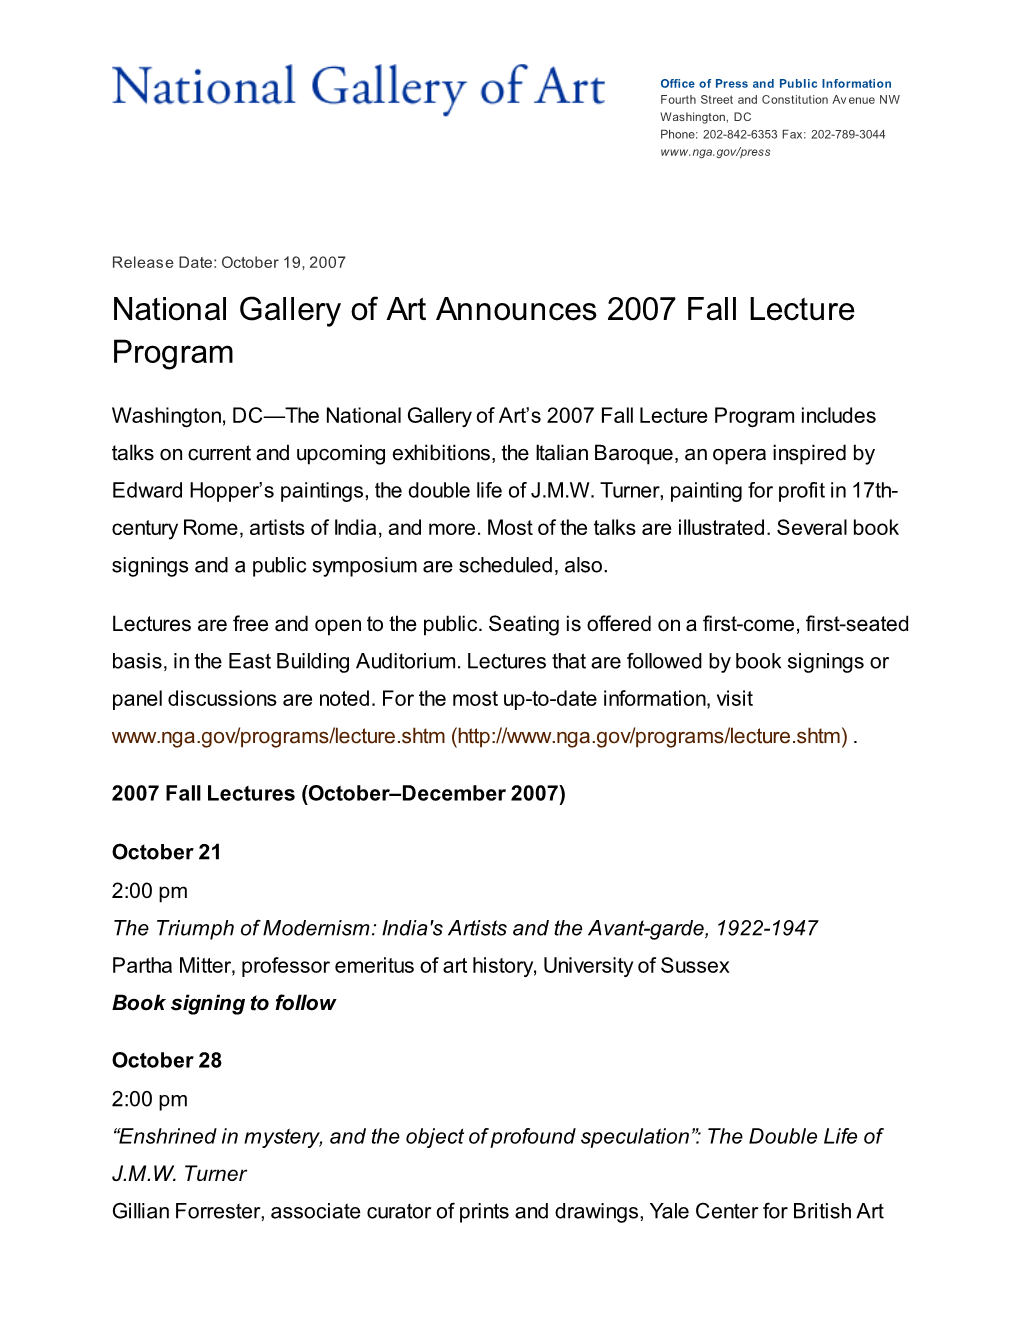 National Gallery of Art Announces 2007 Fall Lecture Program